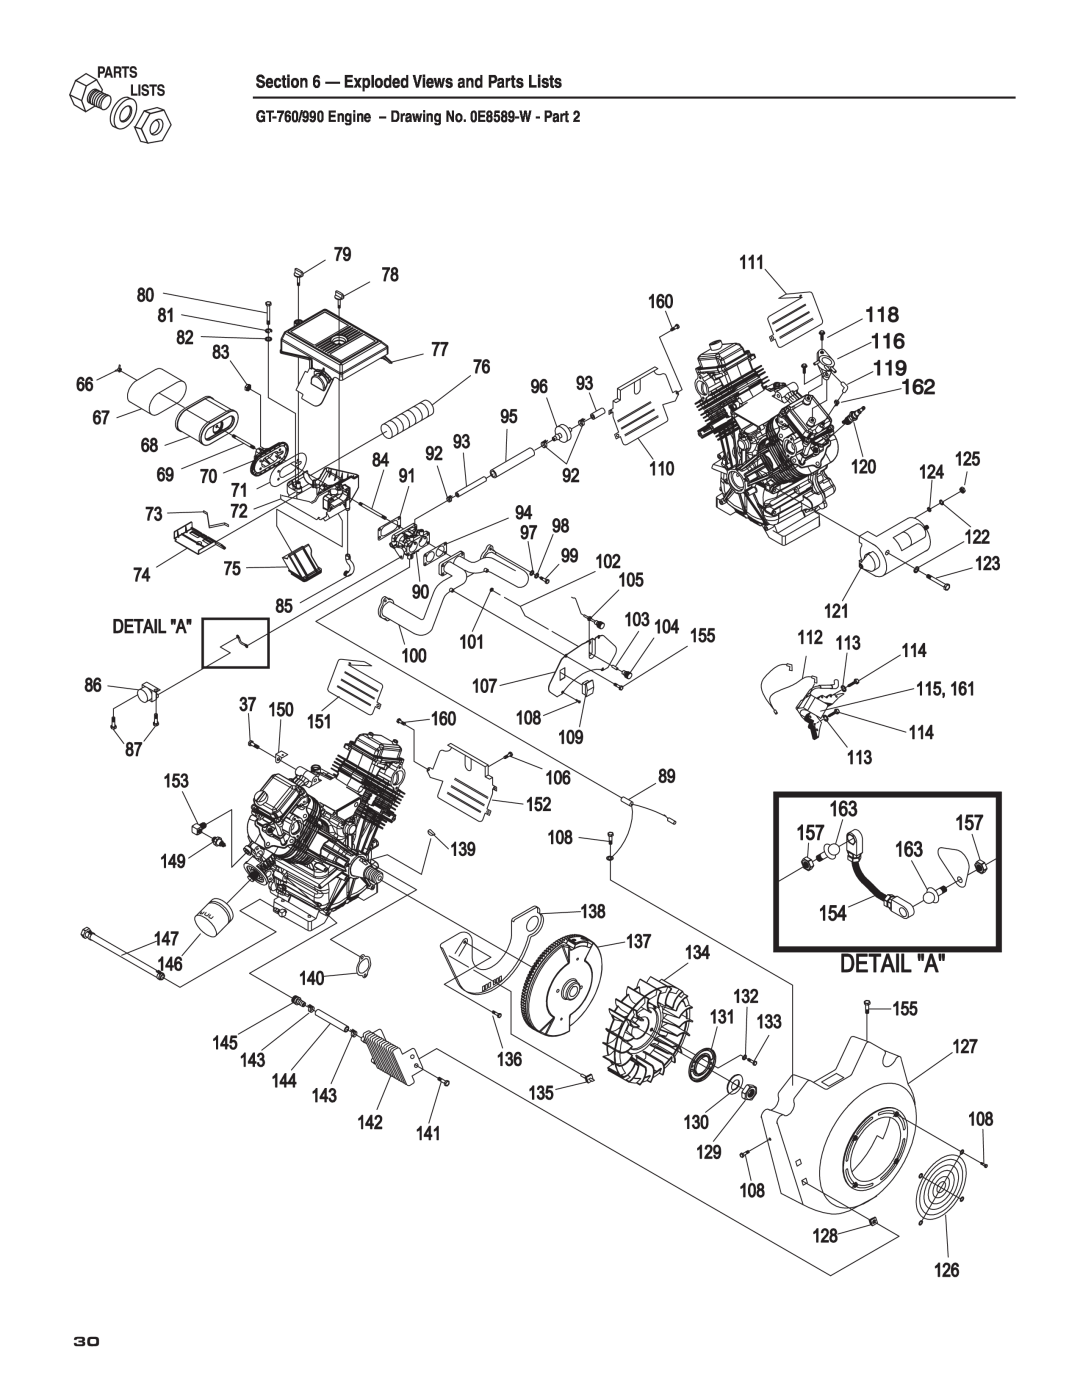 Guardian Technologies 004582-2 owner manual Exploded Views and Parts Lists, GT-760/990Engine – Drawing No. 0E8589-W- Part 